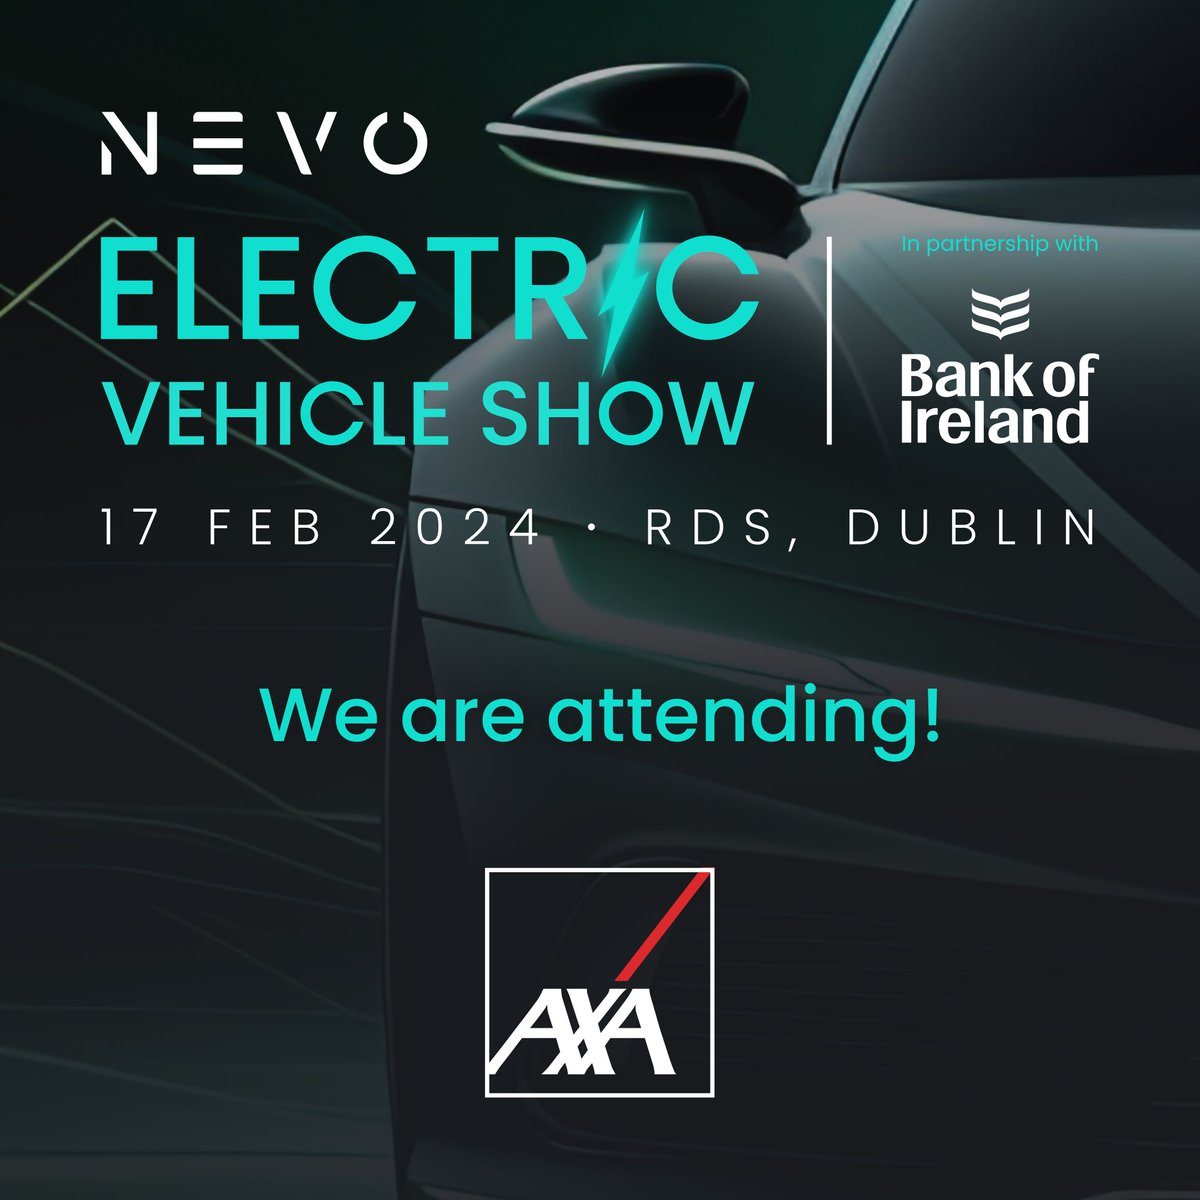 Only 2 days to go until the sold out @nevoireland EV Show at the RDS! Find us at stand 24.